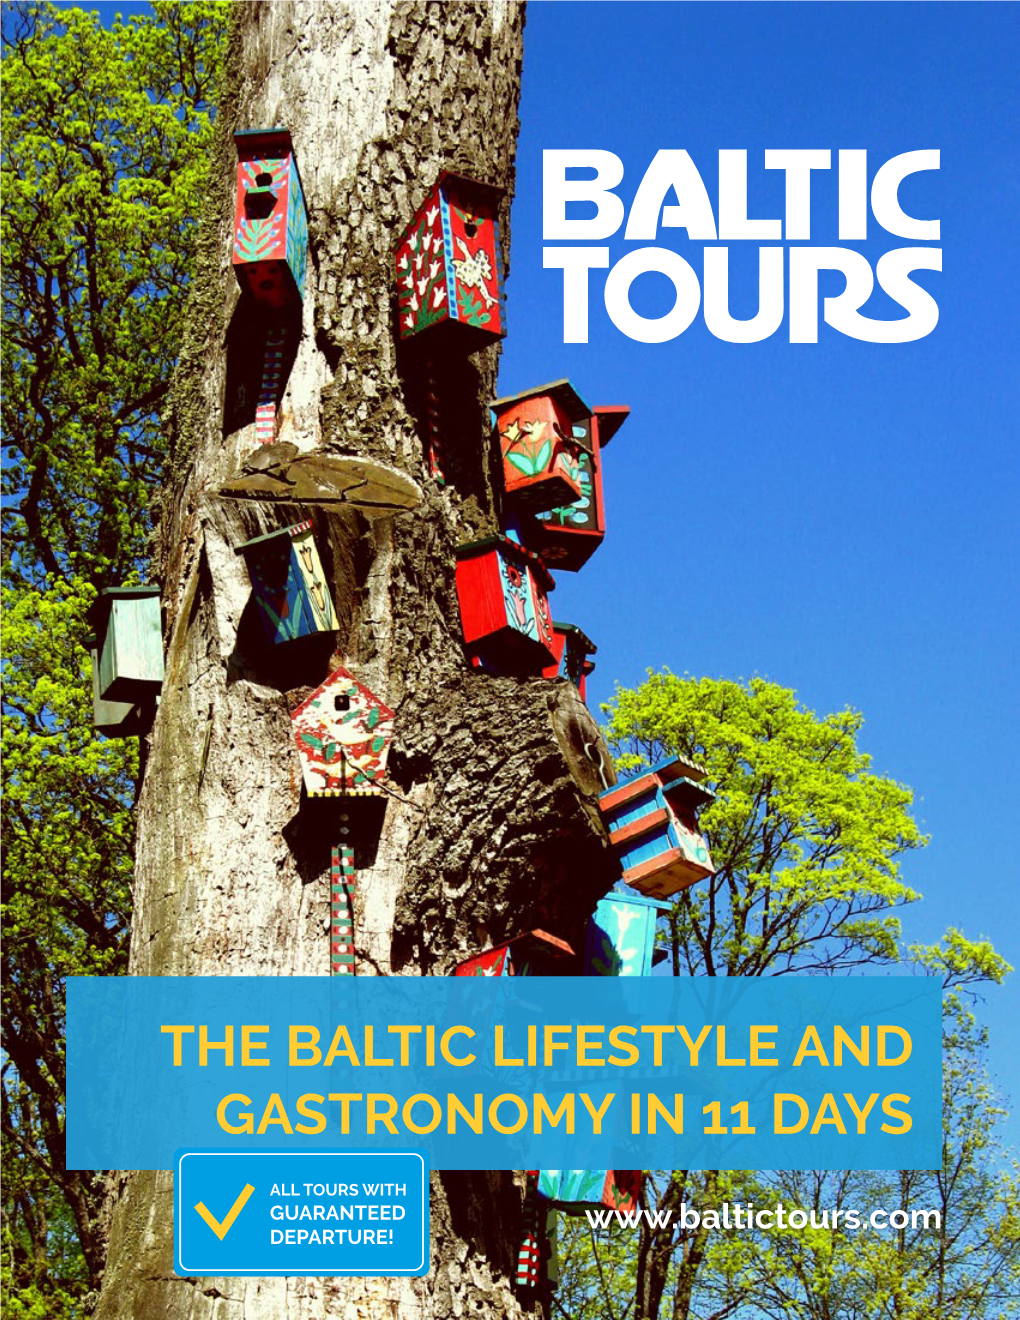 The Baltic Lifestyle and Gastronomy in 11 Days